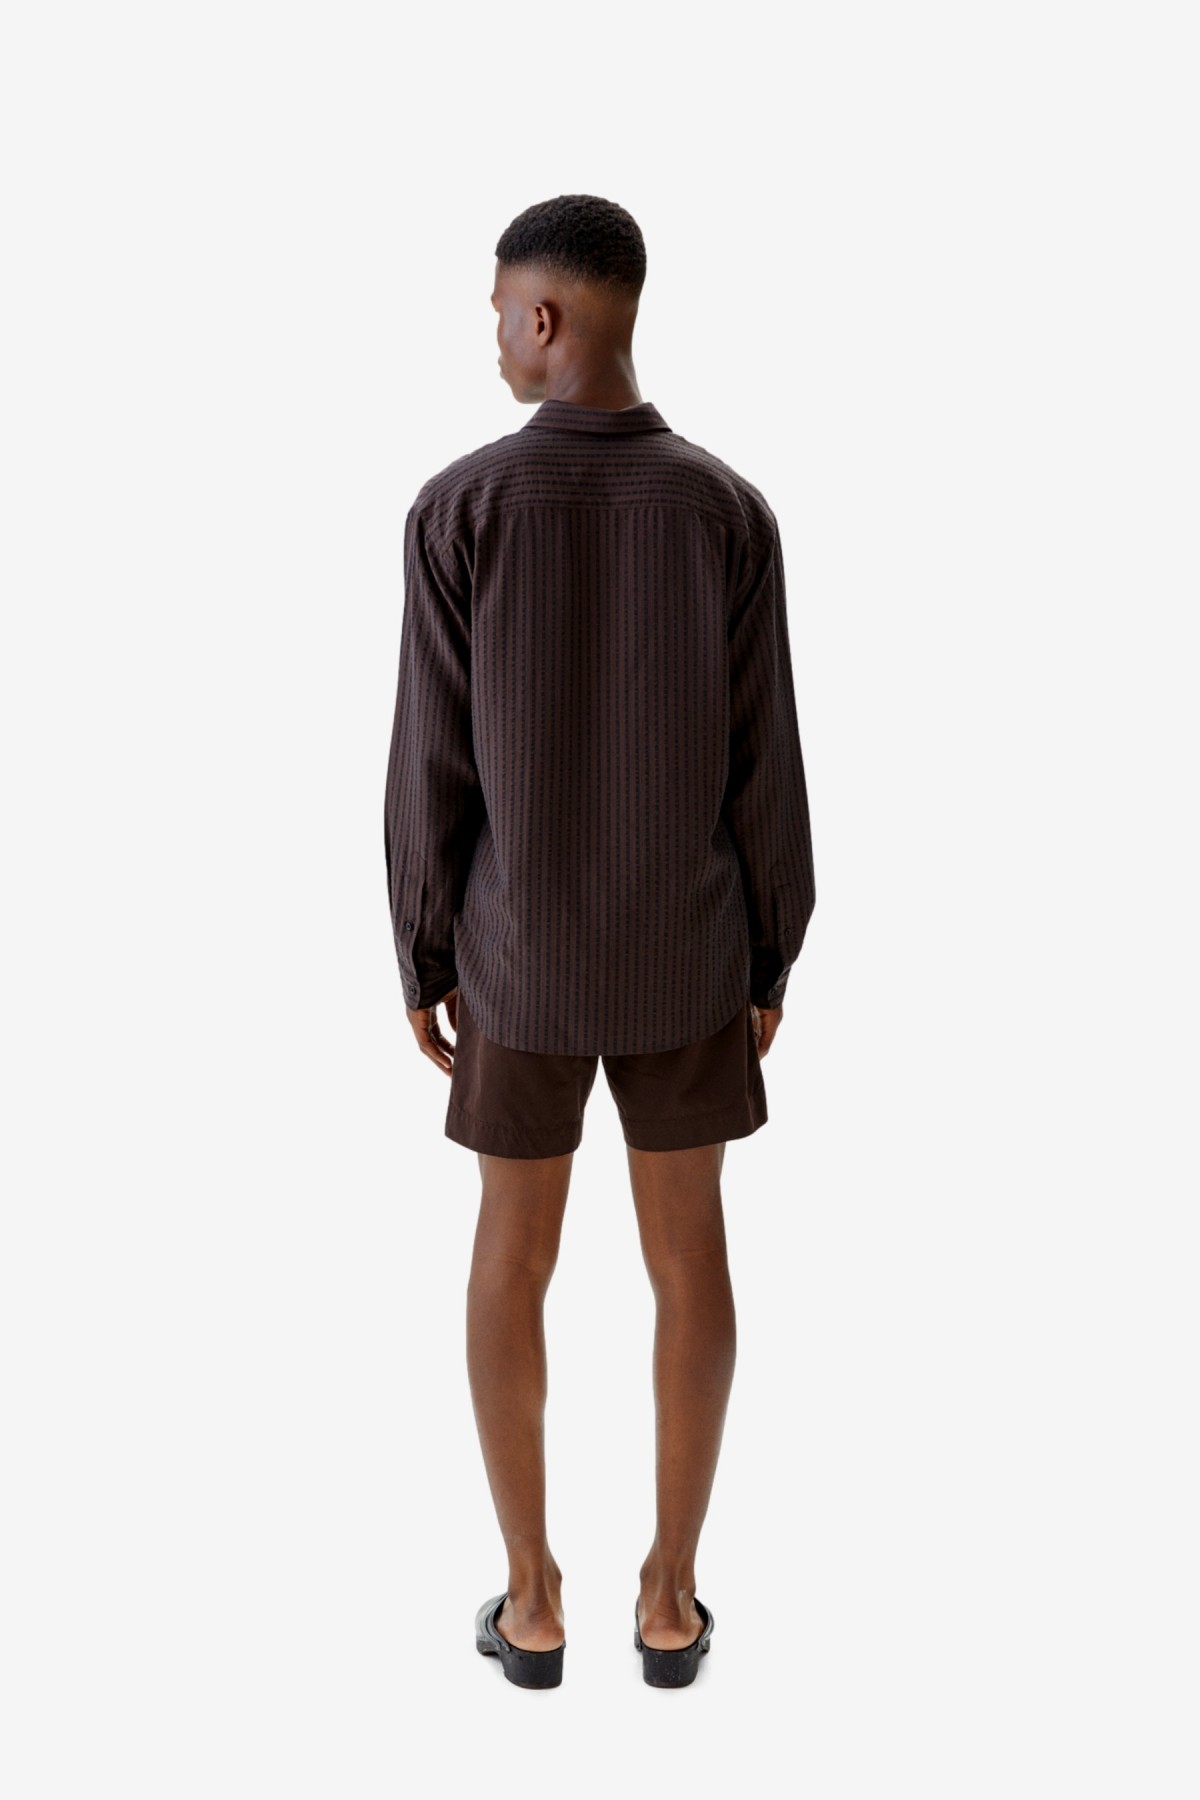 Schnayderman’s Shirt Non-Binary Stripe in Black And Brown